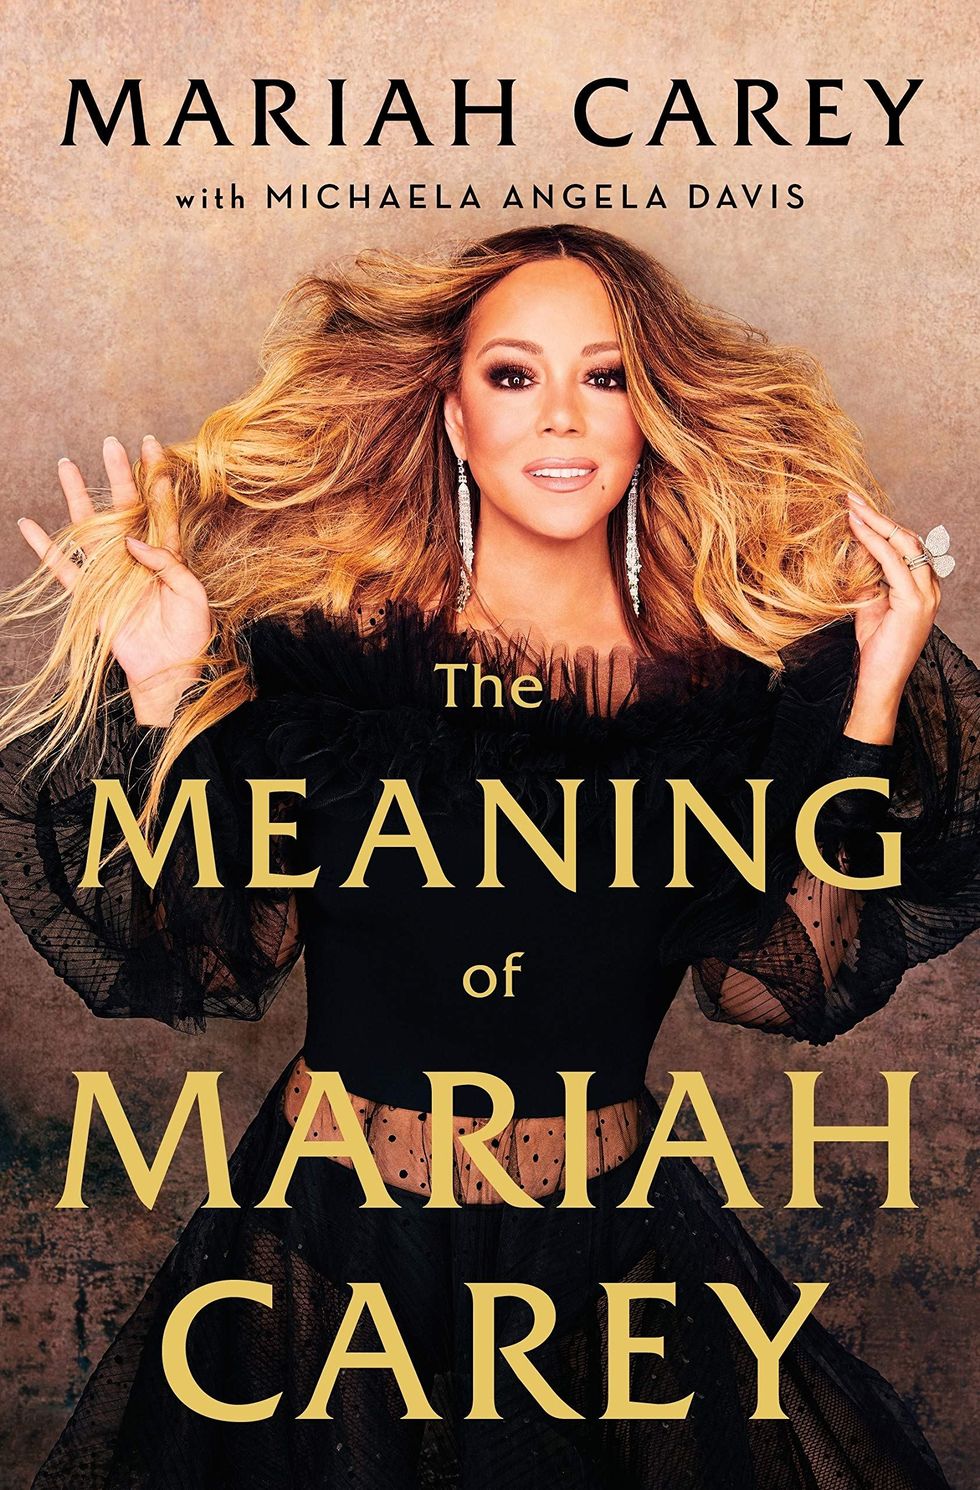 《the meaning of mariah carey》